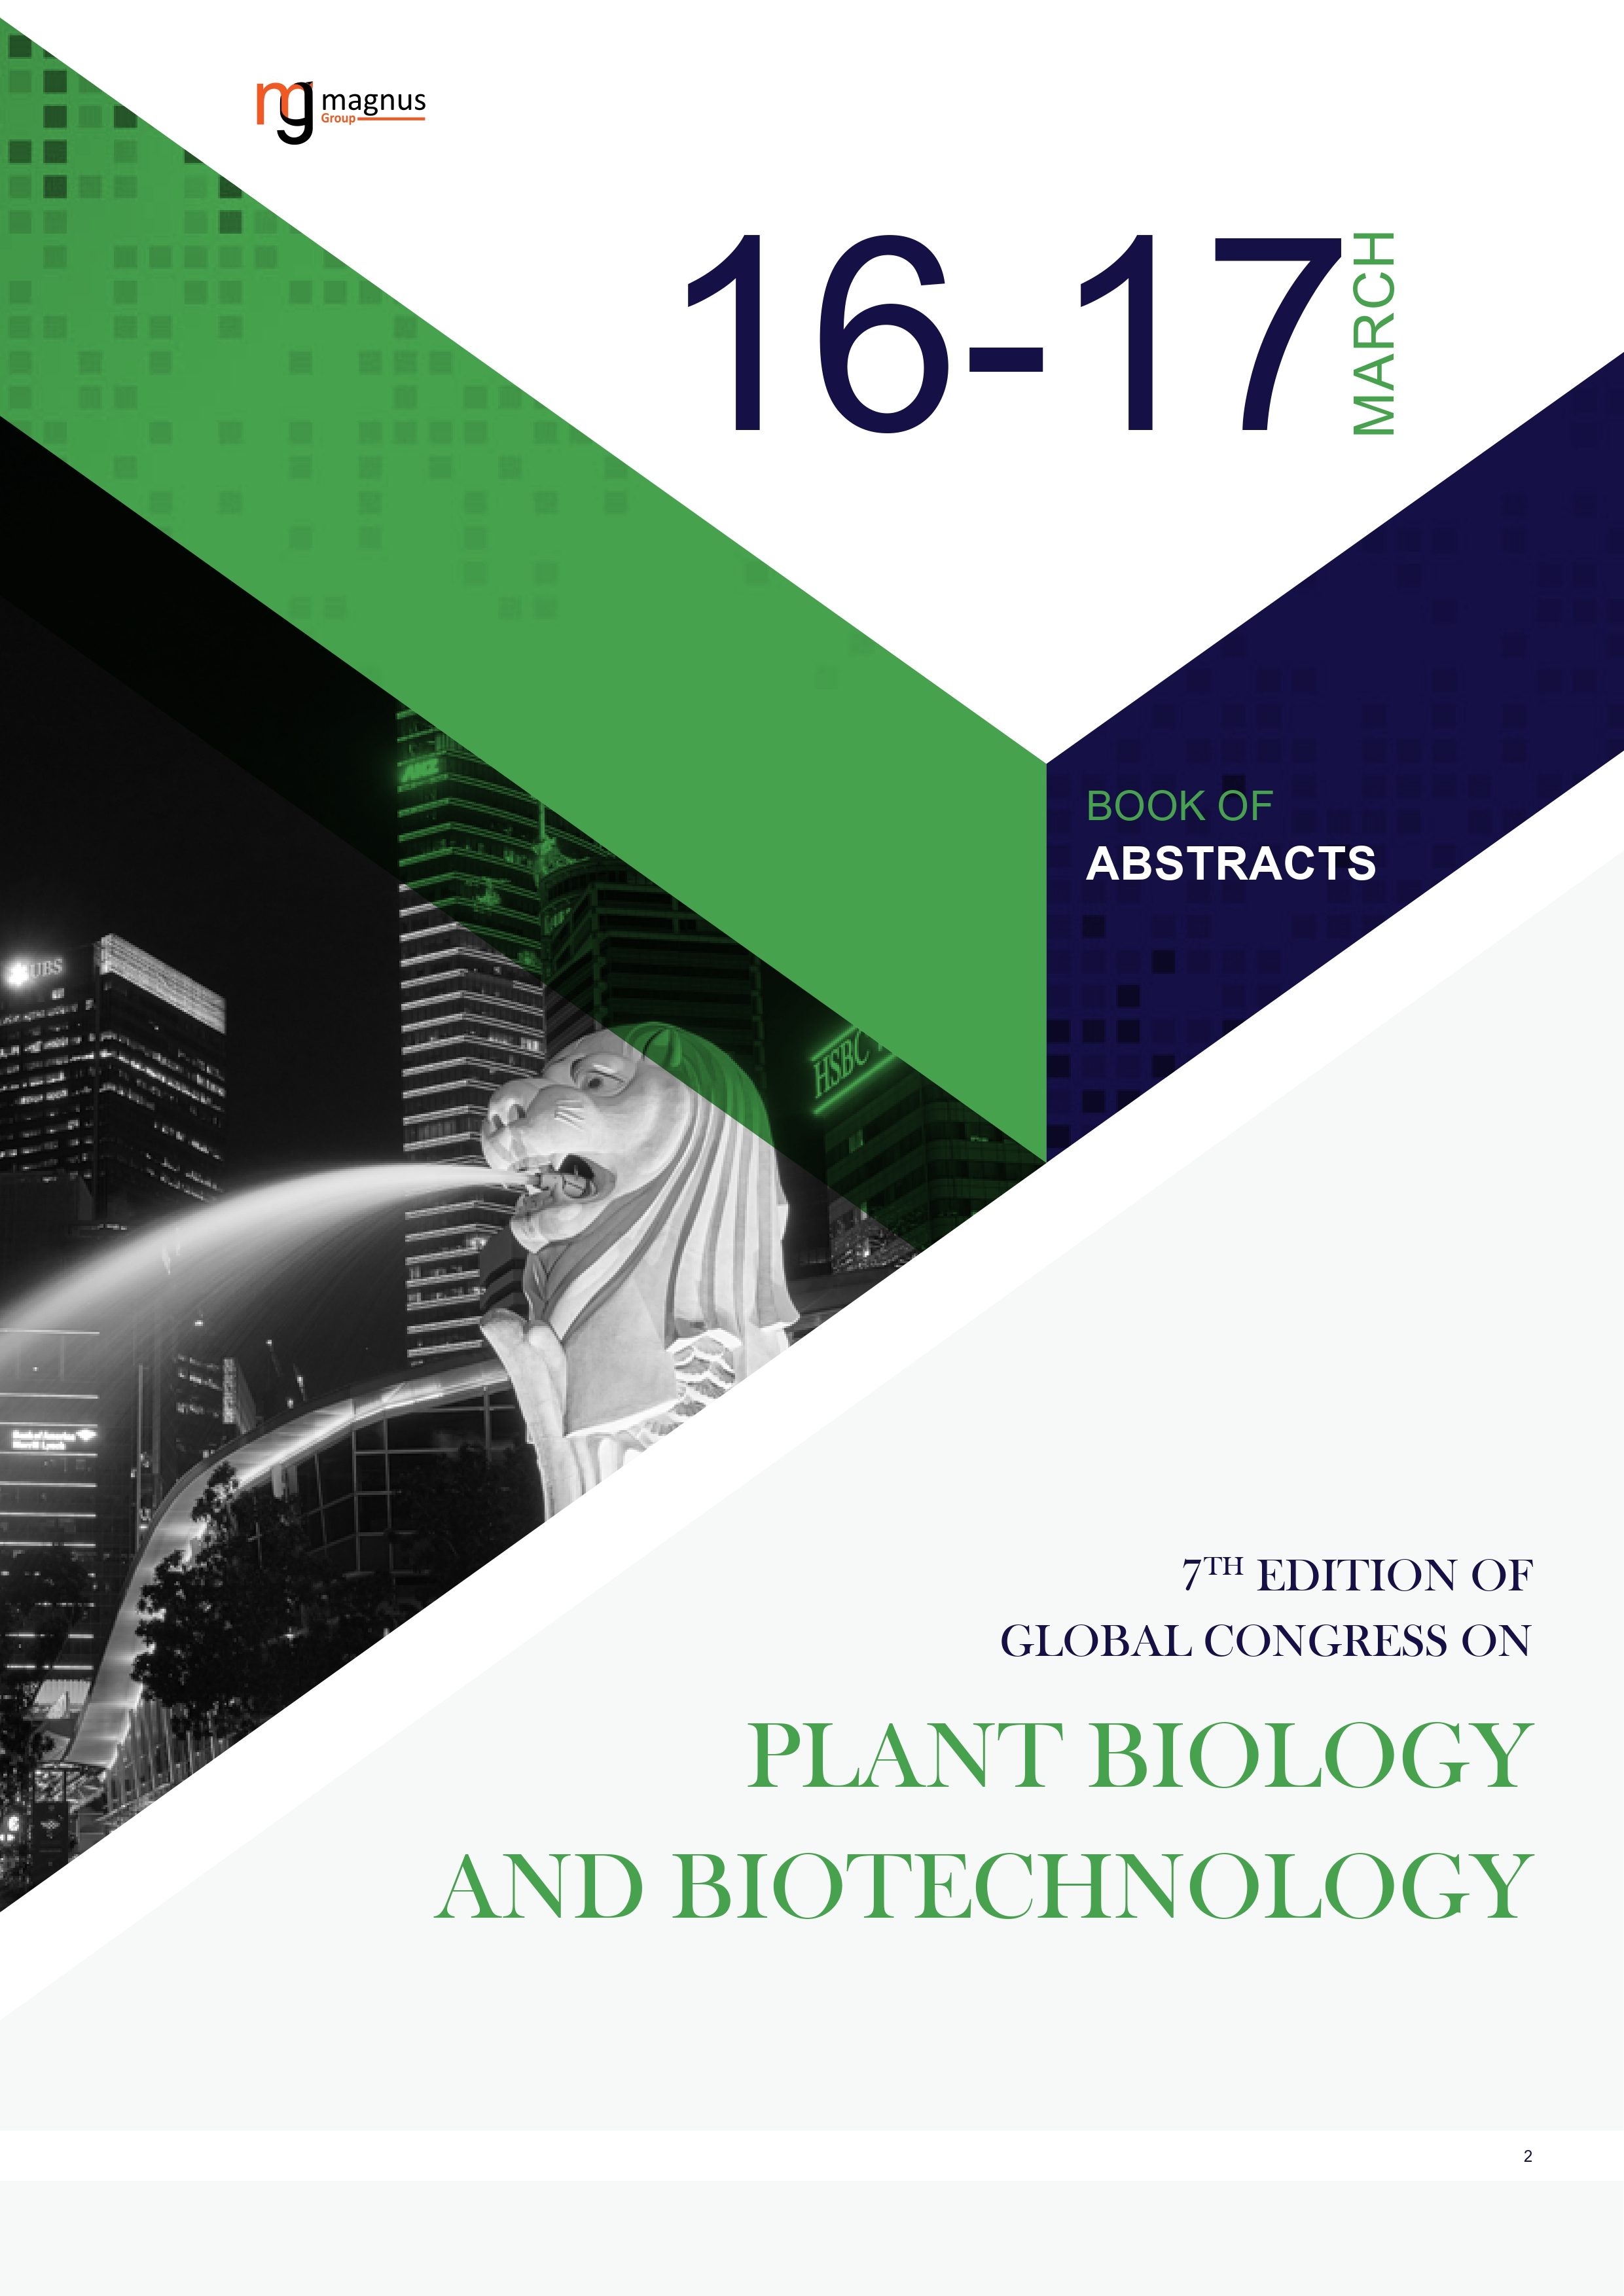 7th Edition of Global Congress on Plant Biology and Biotechnology | Online Event Book